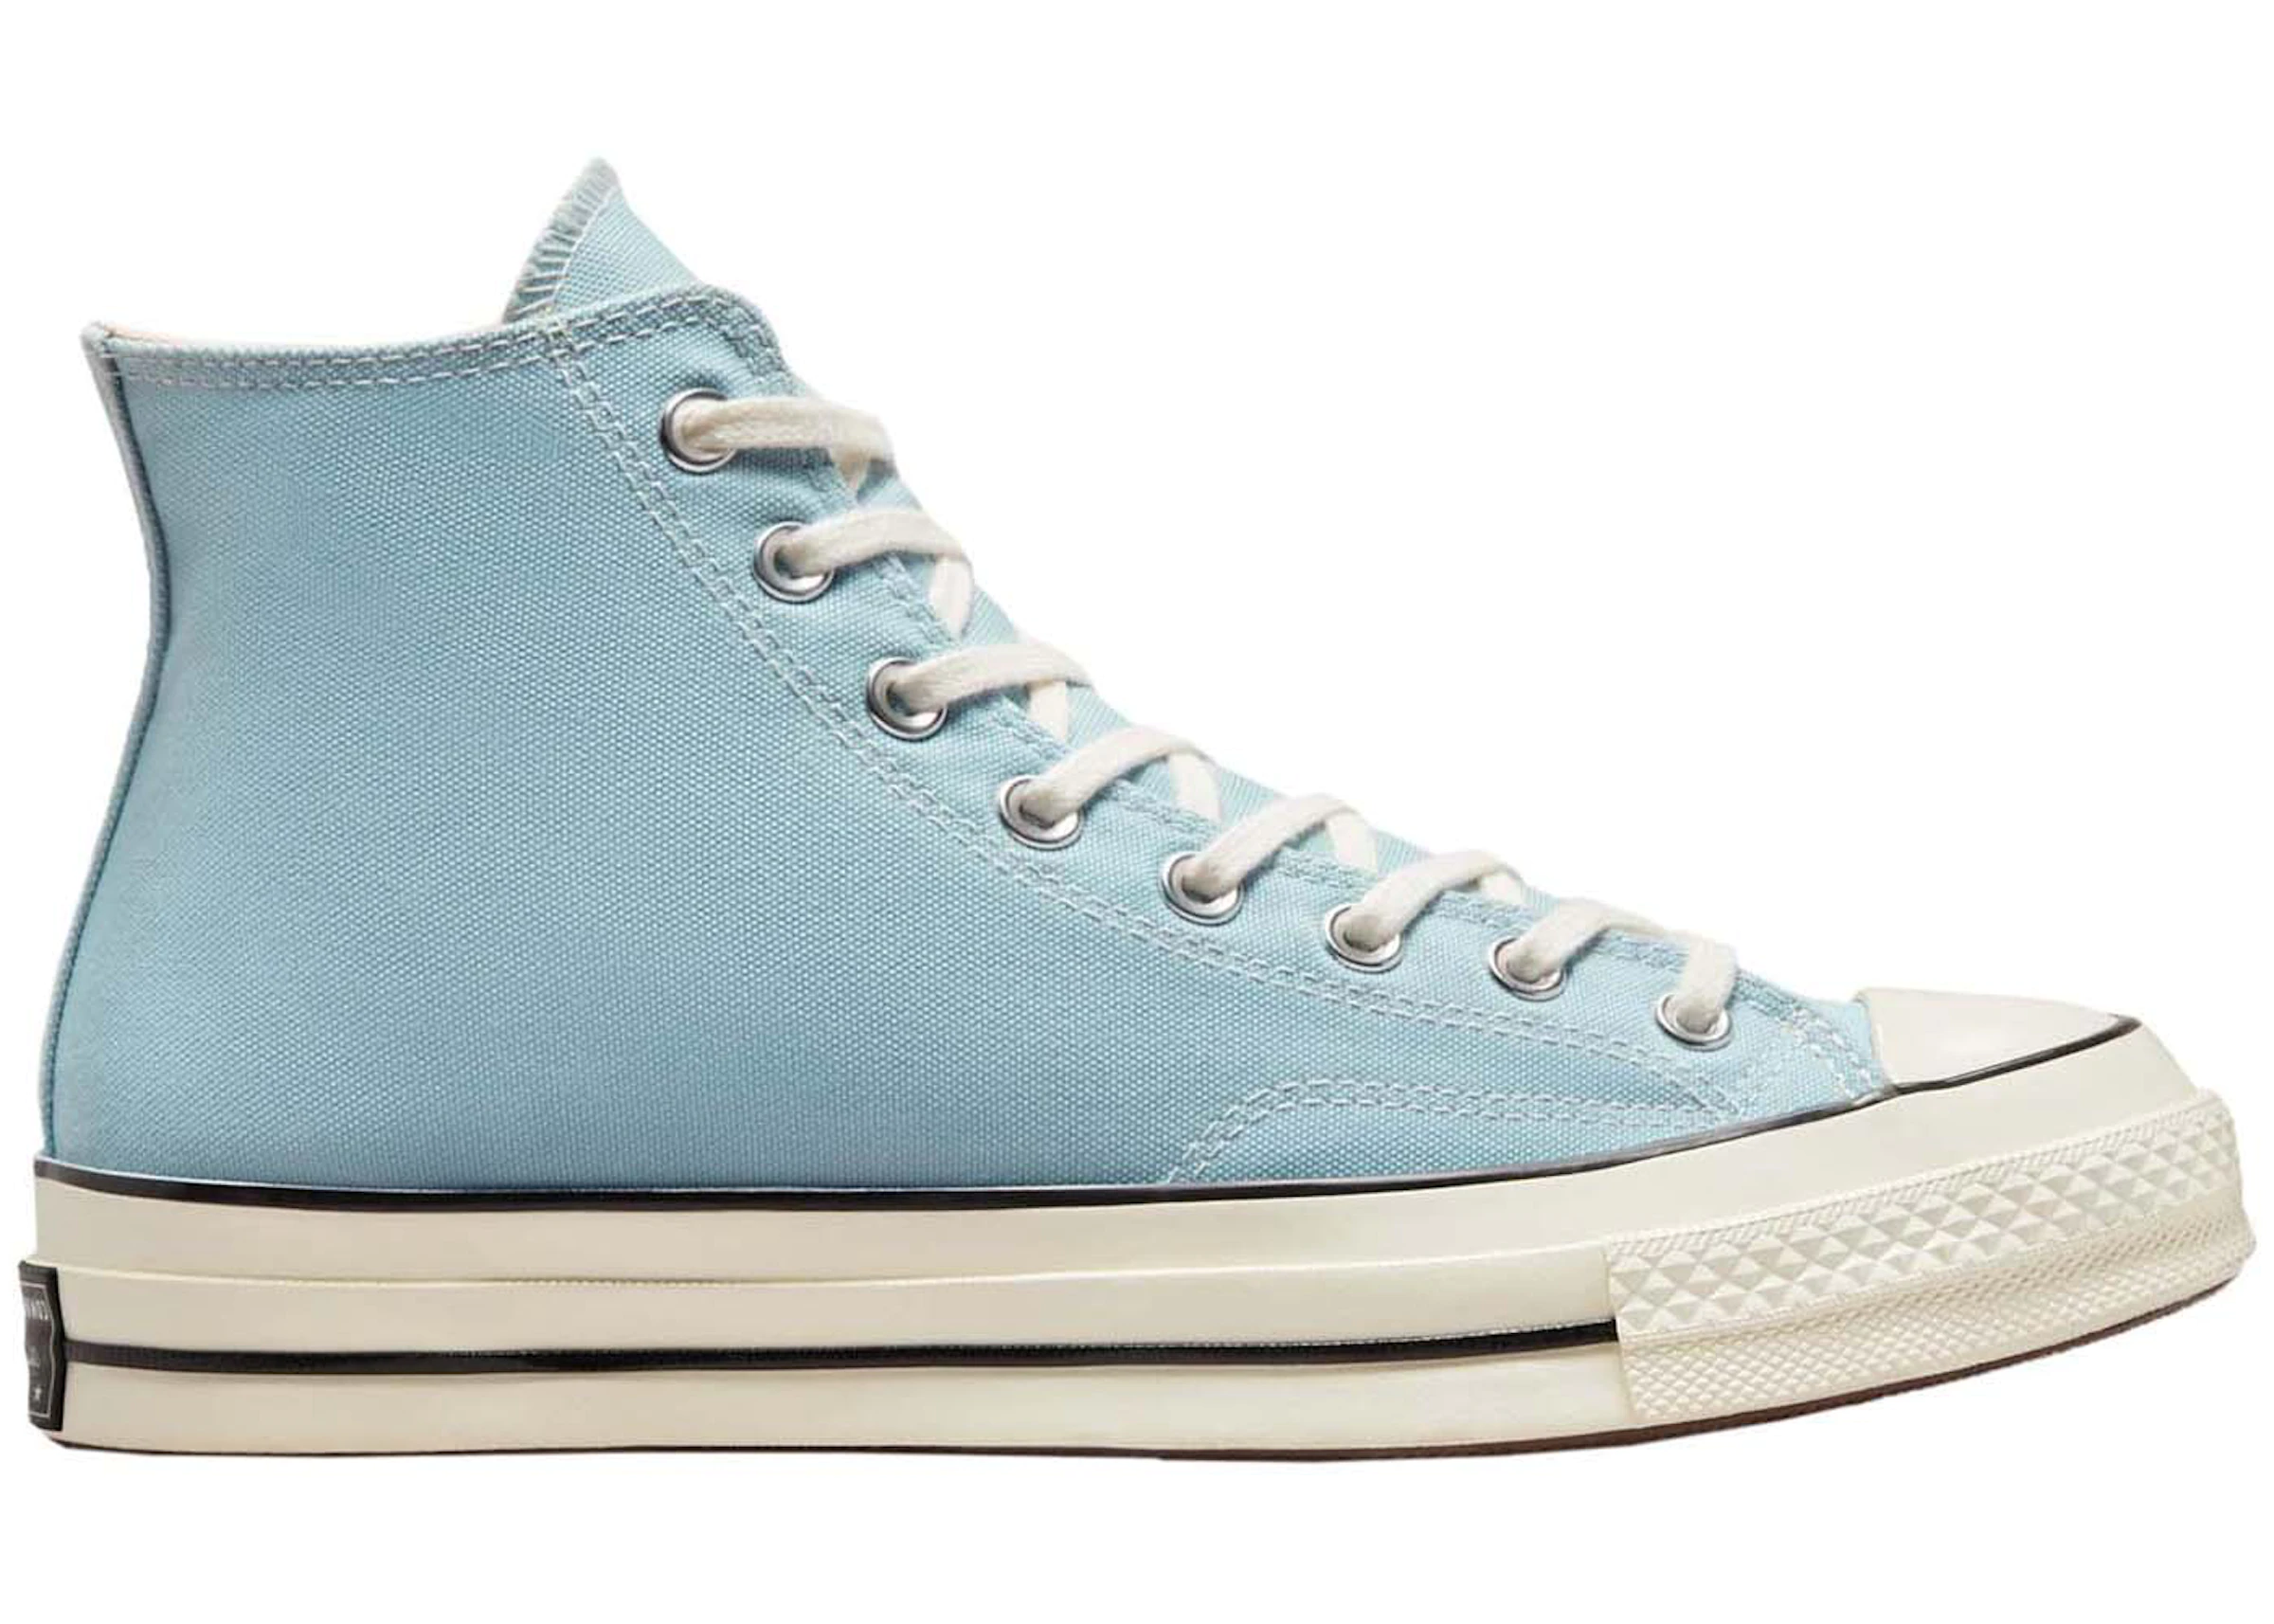 Converse Chuck Taylor All-Star 70 Hi Recycled Canvas Light Armory Blue -  A00459C - US